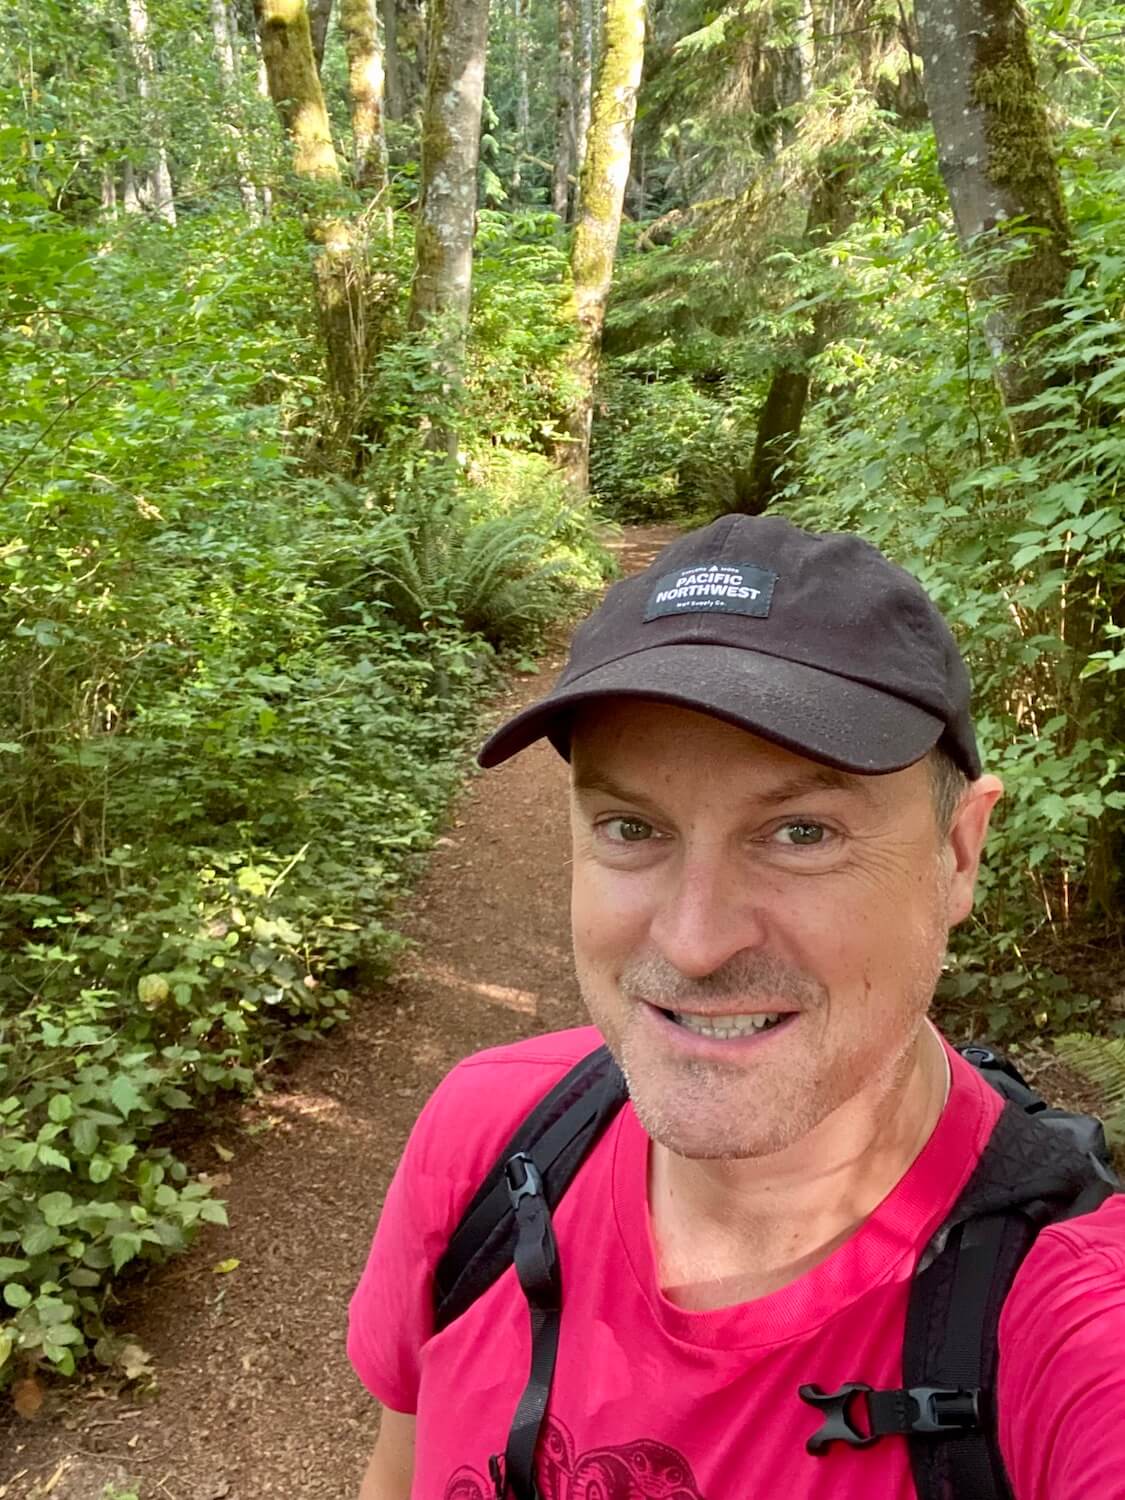 Matthew Kessi takes a selfie while hiking in a thickly wooded forest. He's smiling and wearing a bright red shirt and black cap.